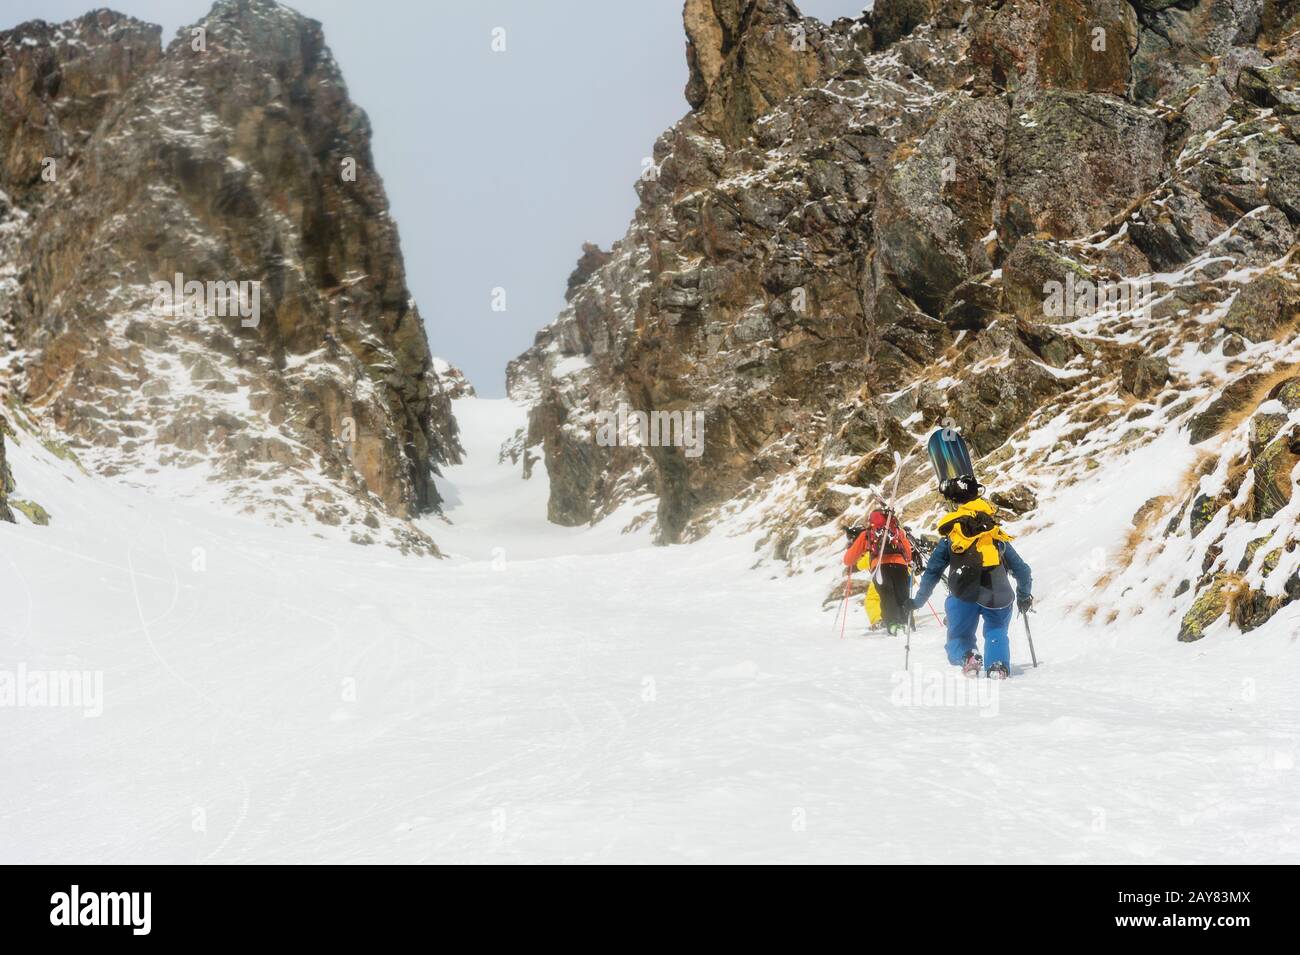 Extreme skiers climb to the top along the couloir between the rocks before the descent of the freeride backcountry Stock Photo